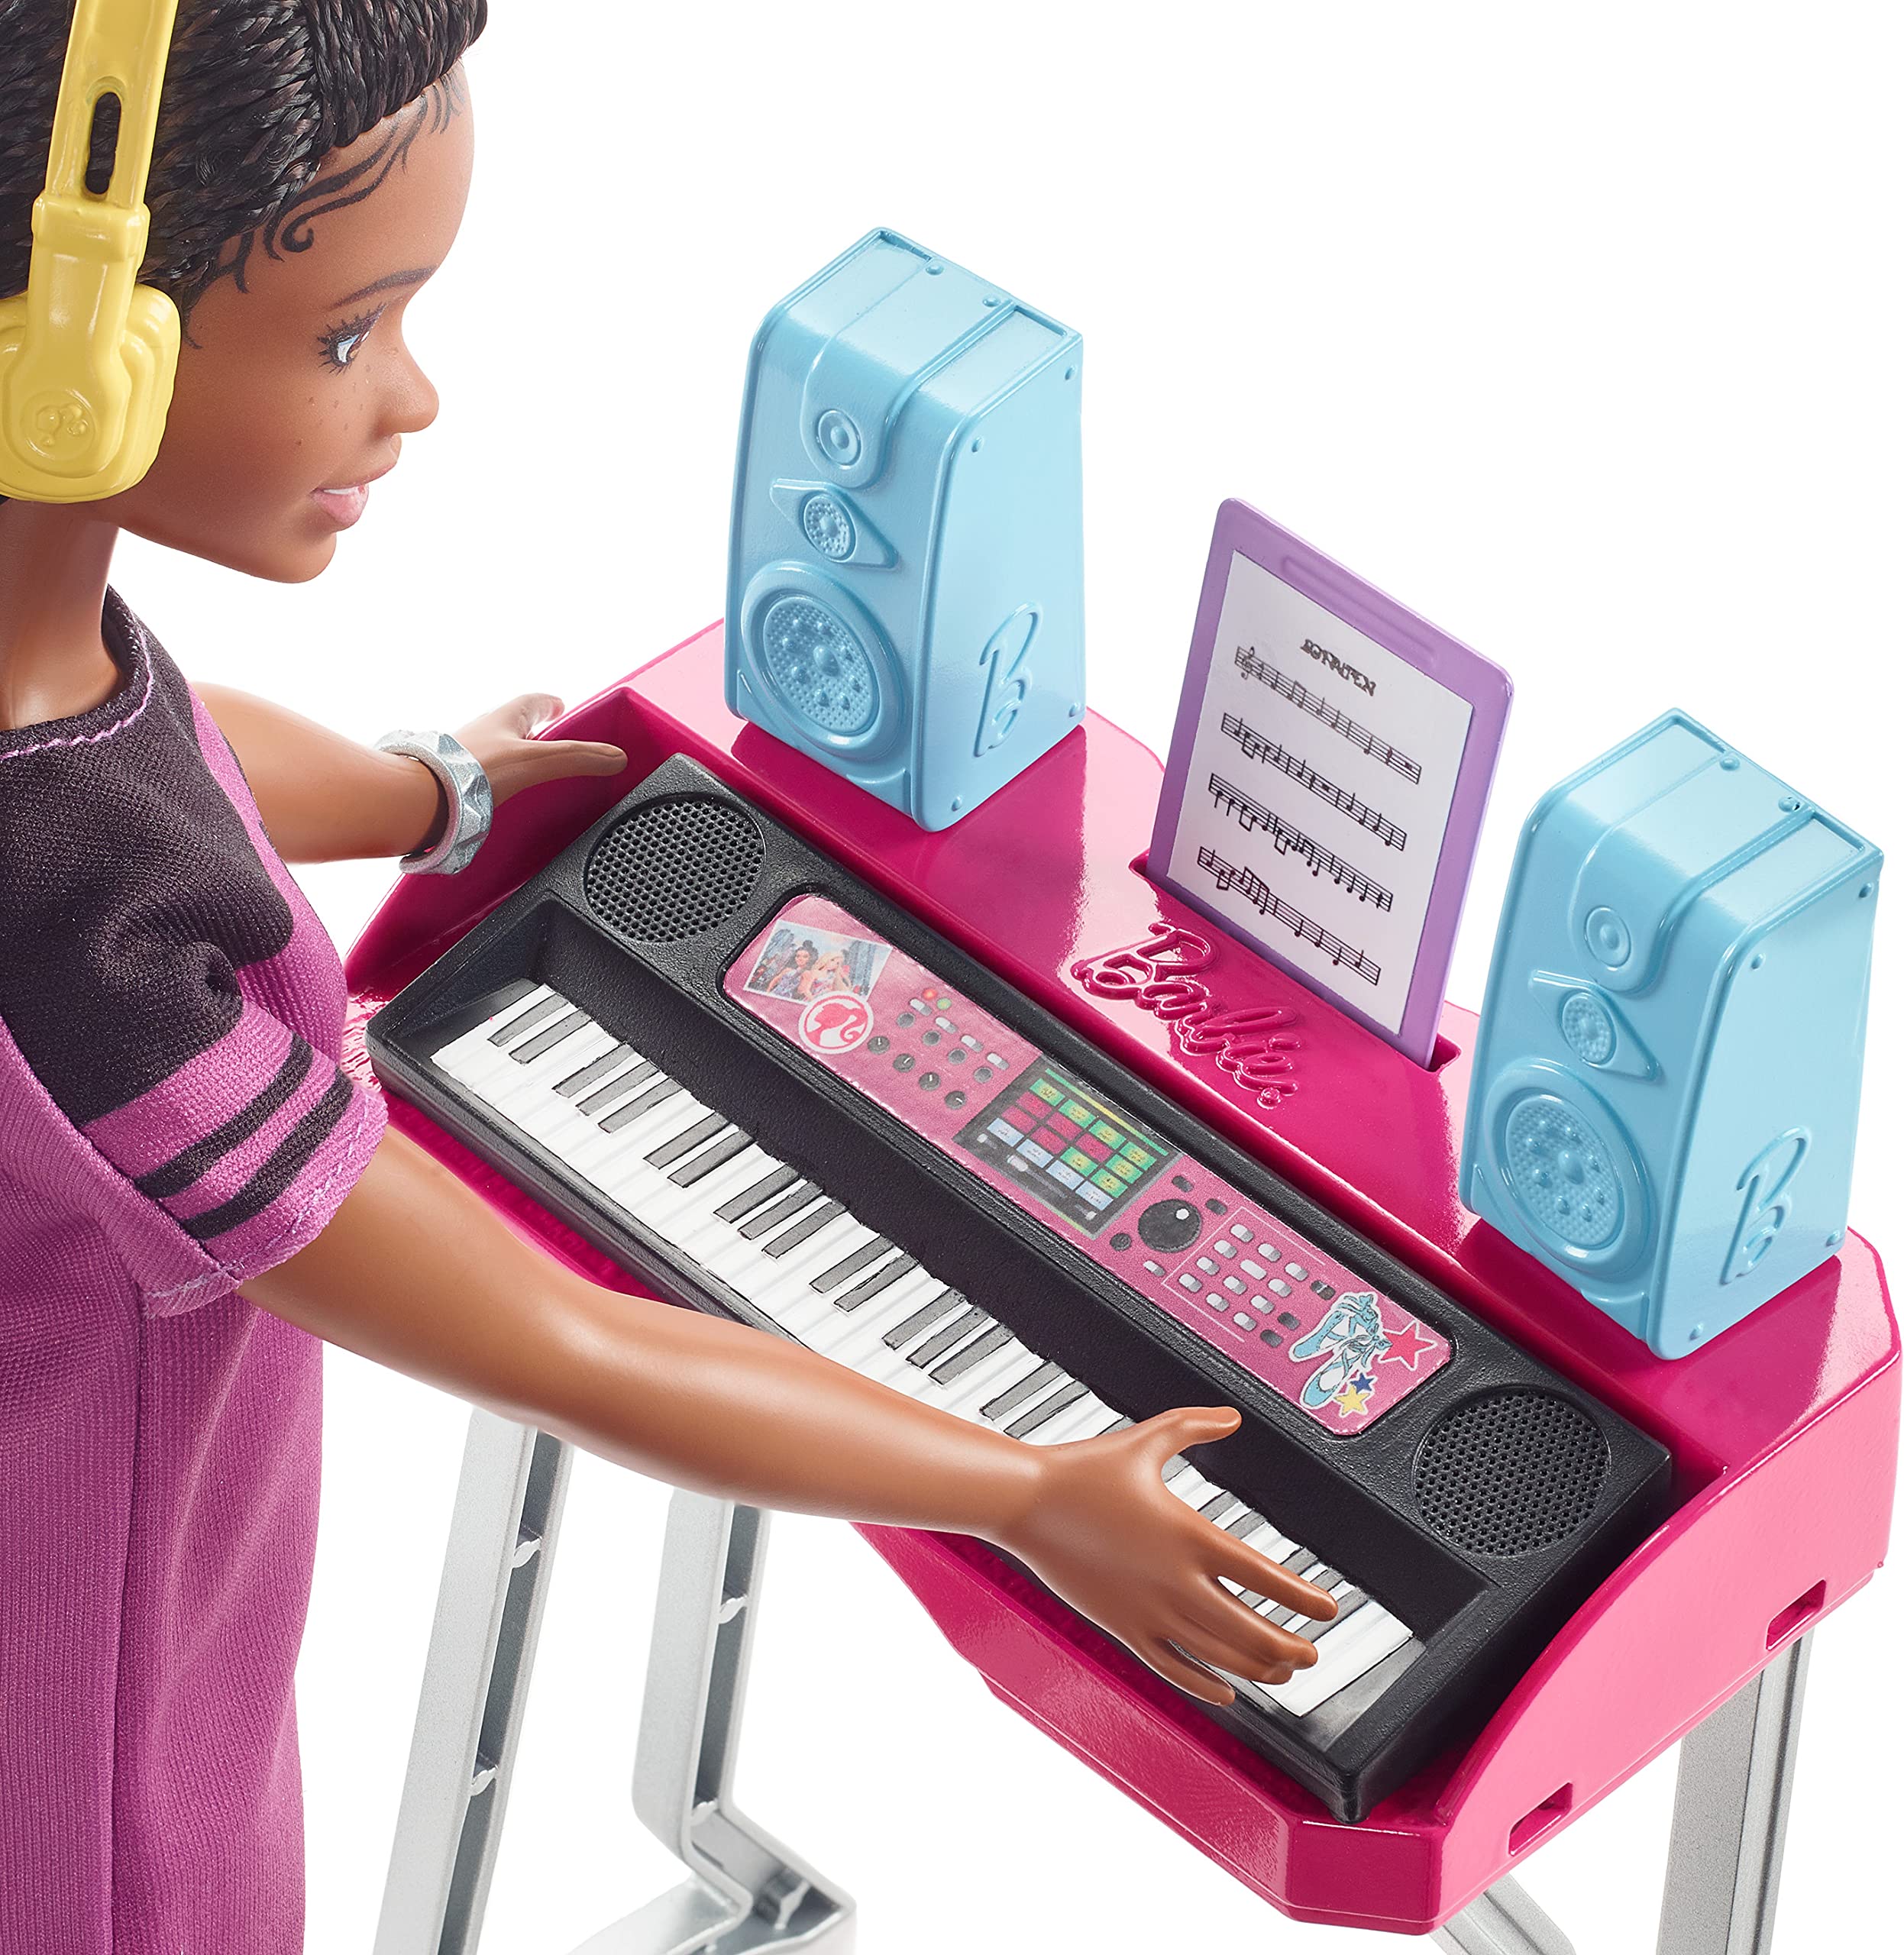 Barbie: Big City, Big Dreams Barbie “Brooklyn” Roberts Doll (11.5-in, Brunette with Braids) & Music Studio Playset with Keyboard & Accessories, Gift for 3 to 7 Year Olds